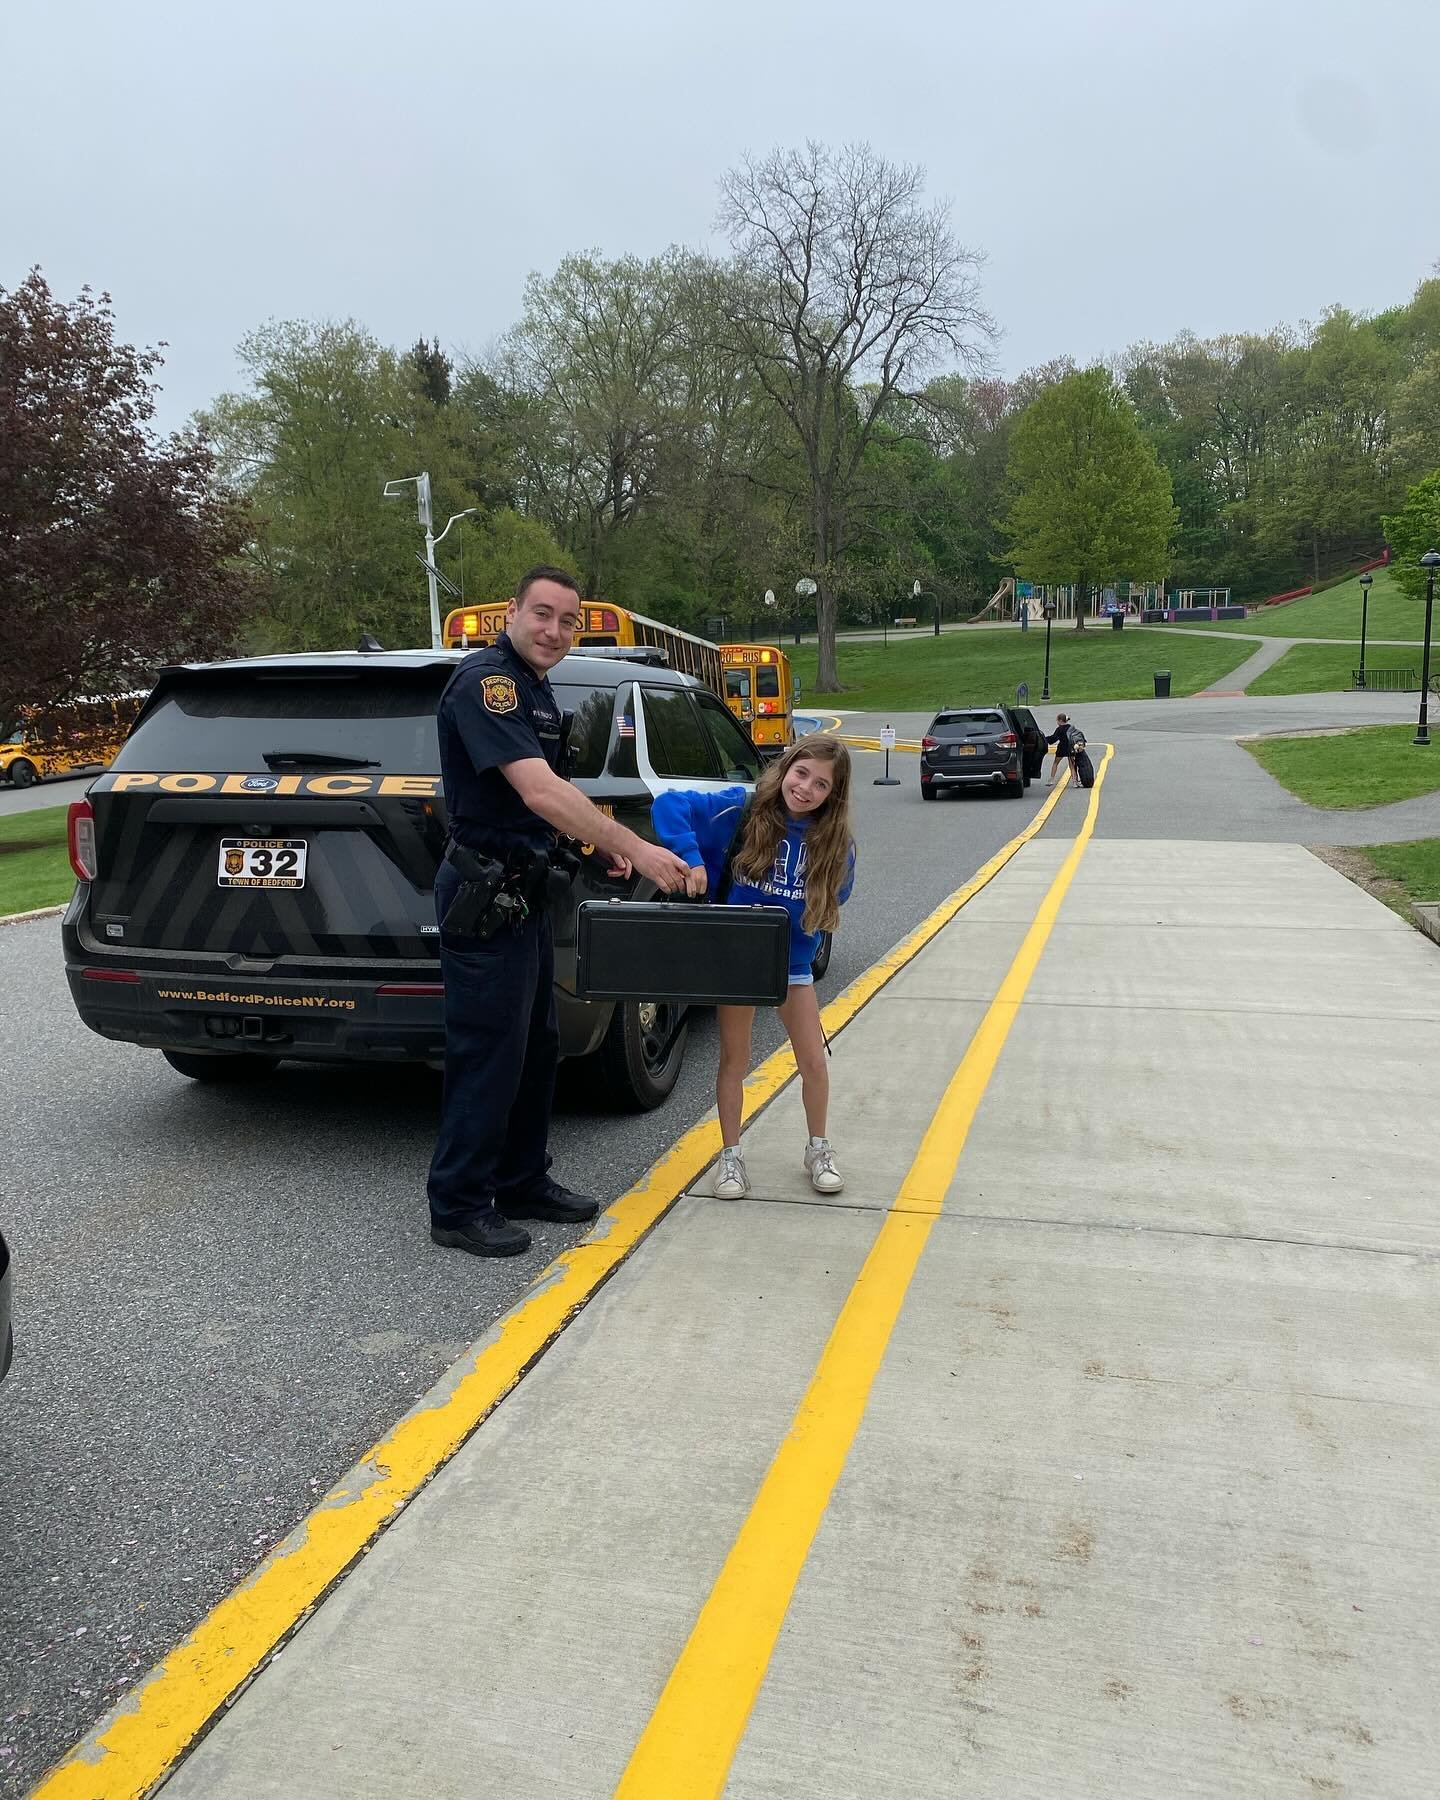 &ldquo;What&rsquo;s the buzz at KES? Relax, no chaos here. Just a couple of #KESkids whose parents supported the KES PTO at this years auction scoring a free lift to school... in a police cruiser! Talk about a VIP escort! 🚓 Thanks @townofbedfordpd f